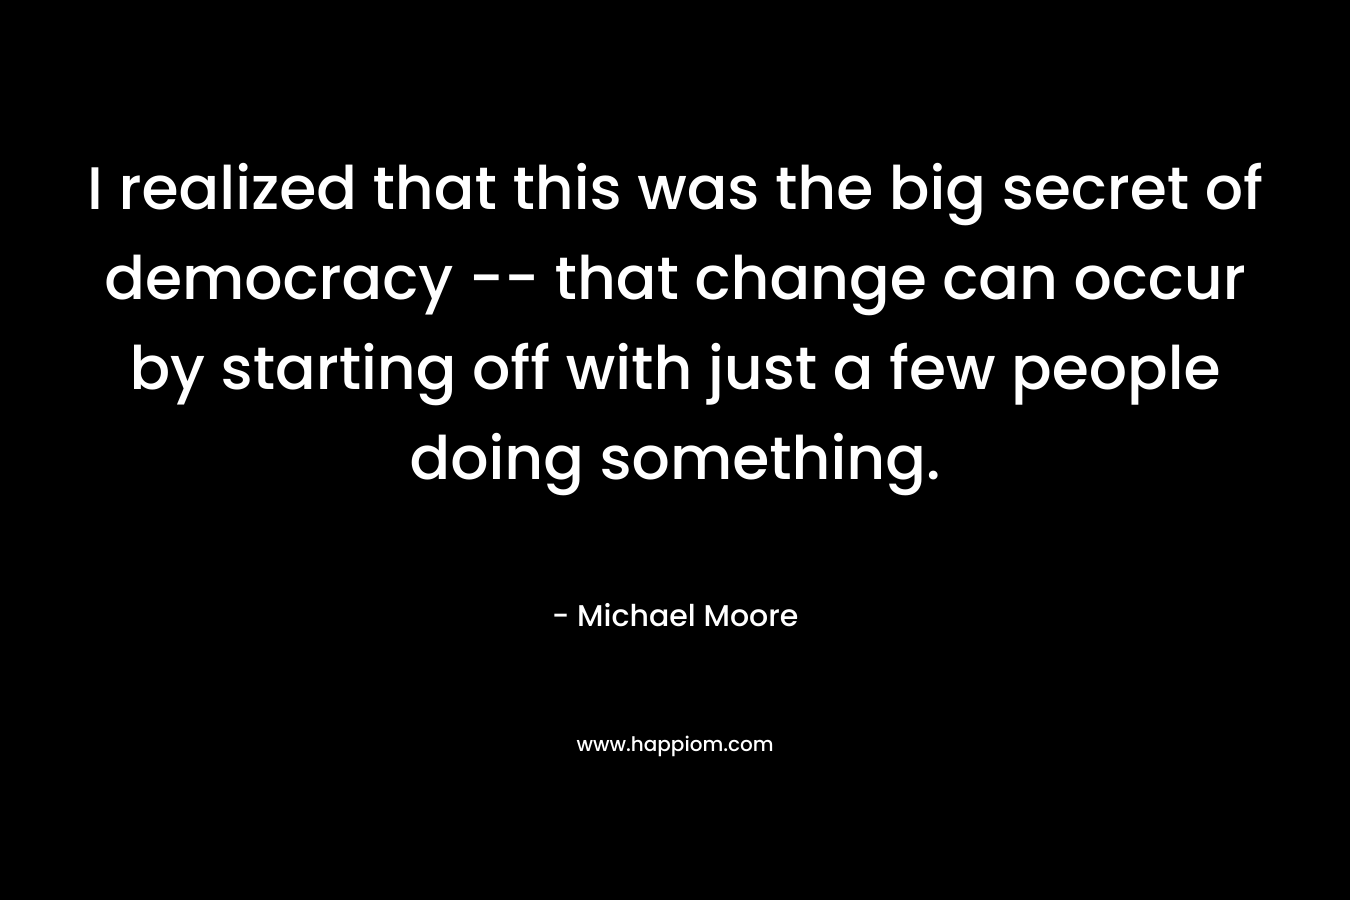 I realized that this was the big secret of democracy — that change can occur by starting off with just a few people doing something. – Michael Moore